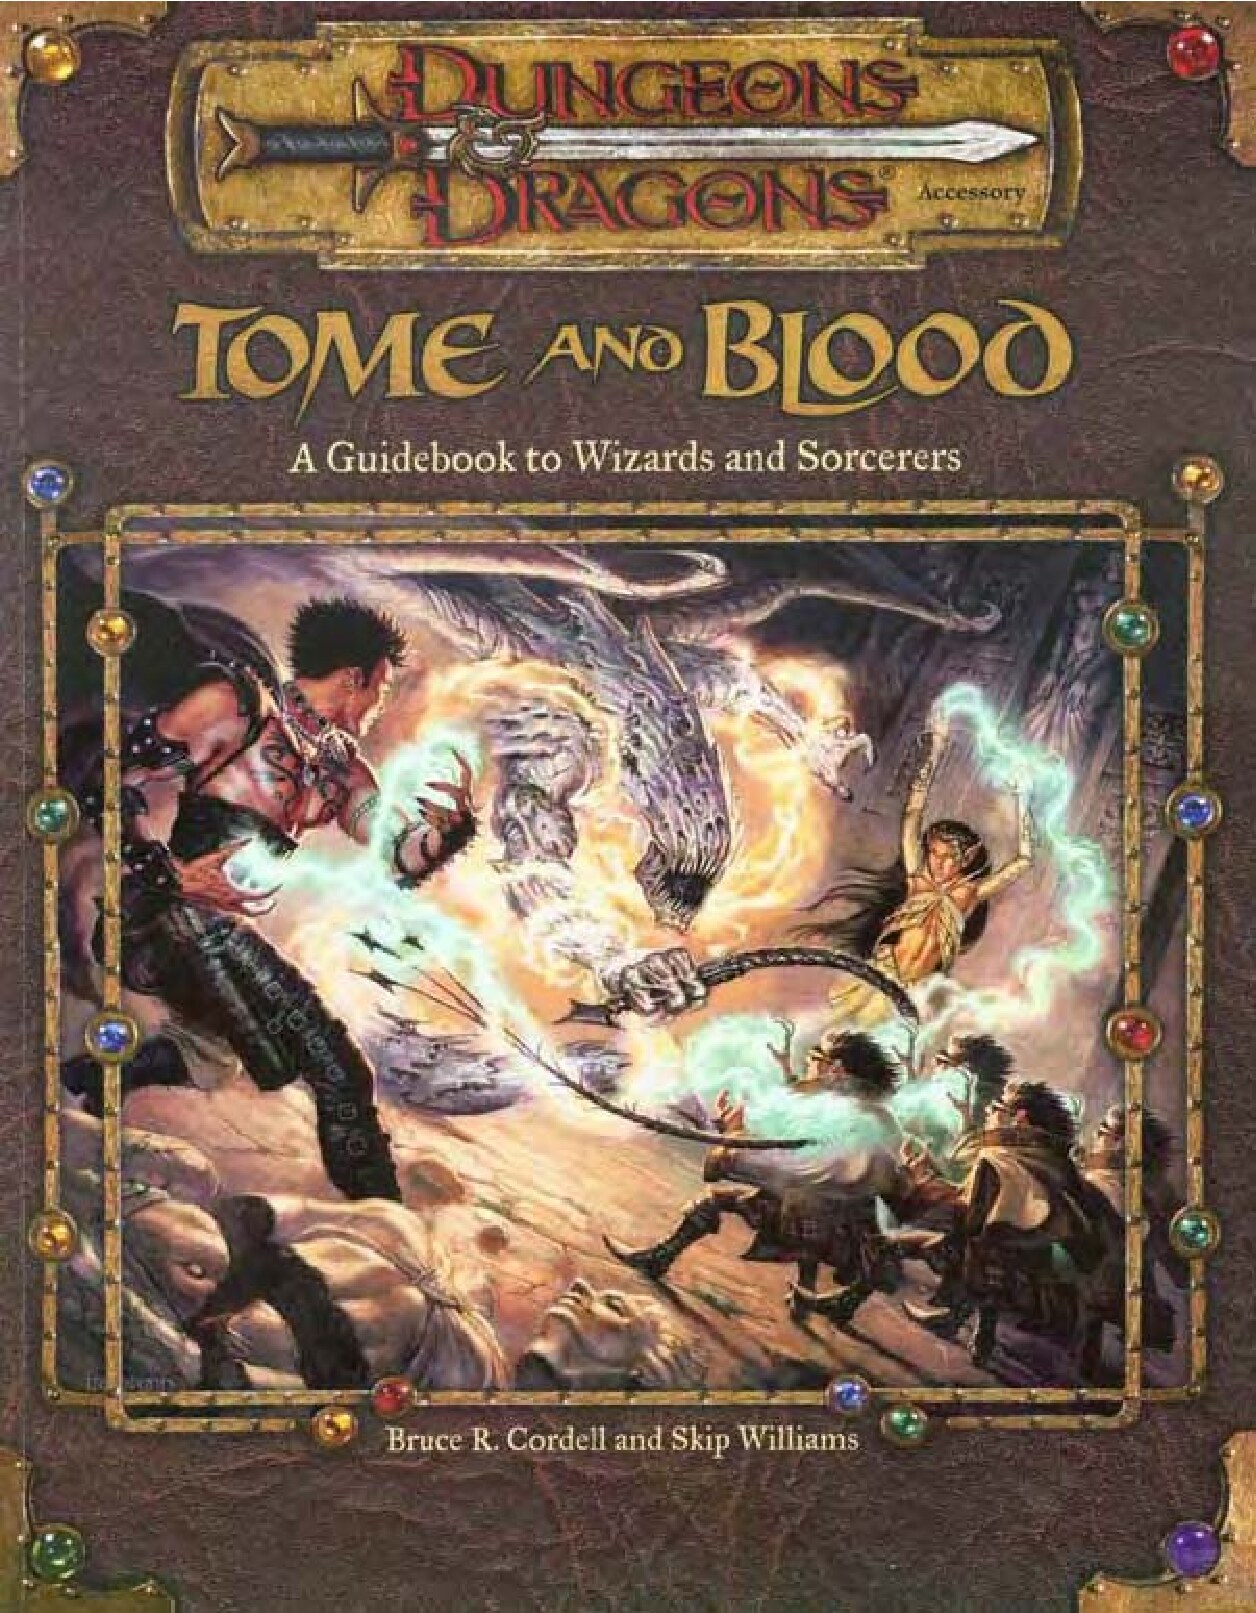 Tome and Blood: A Guidebook to Wizards and Sorcerers